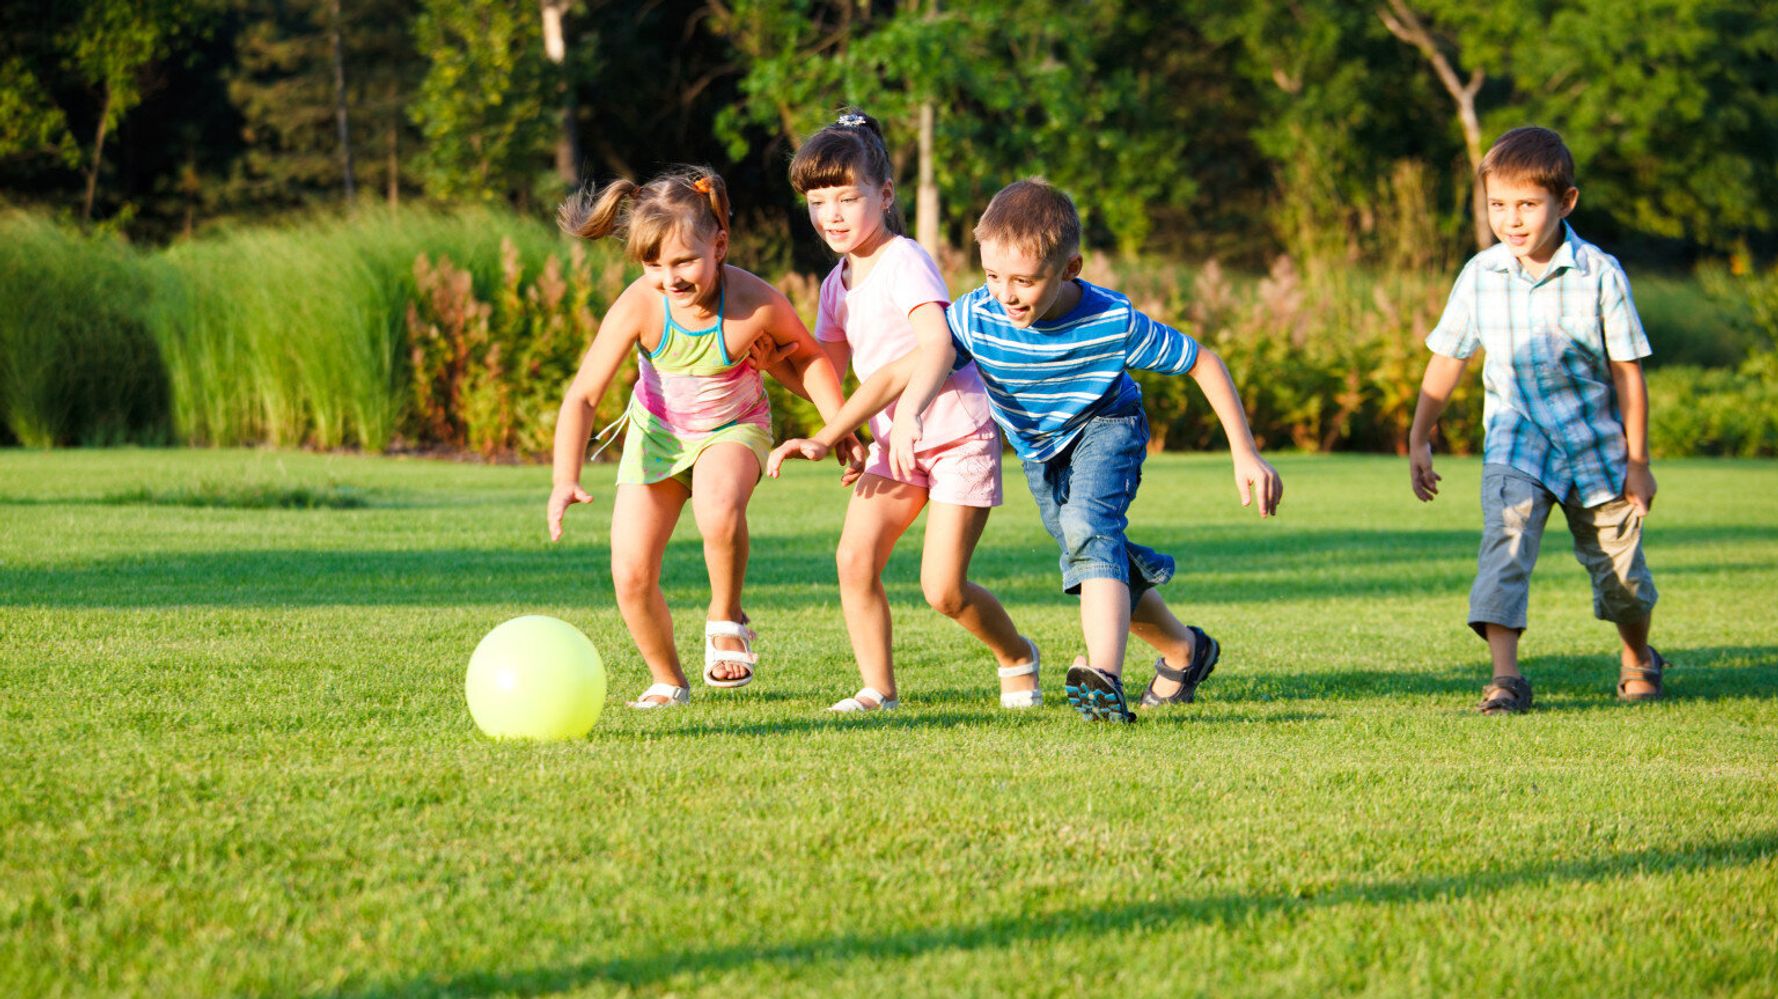 Let the Children Play! - Why Children Should Be Playing Outside This